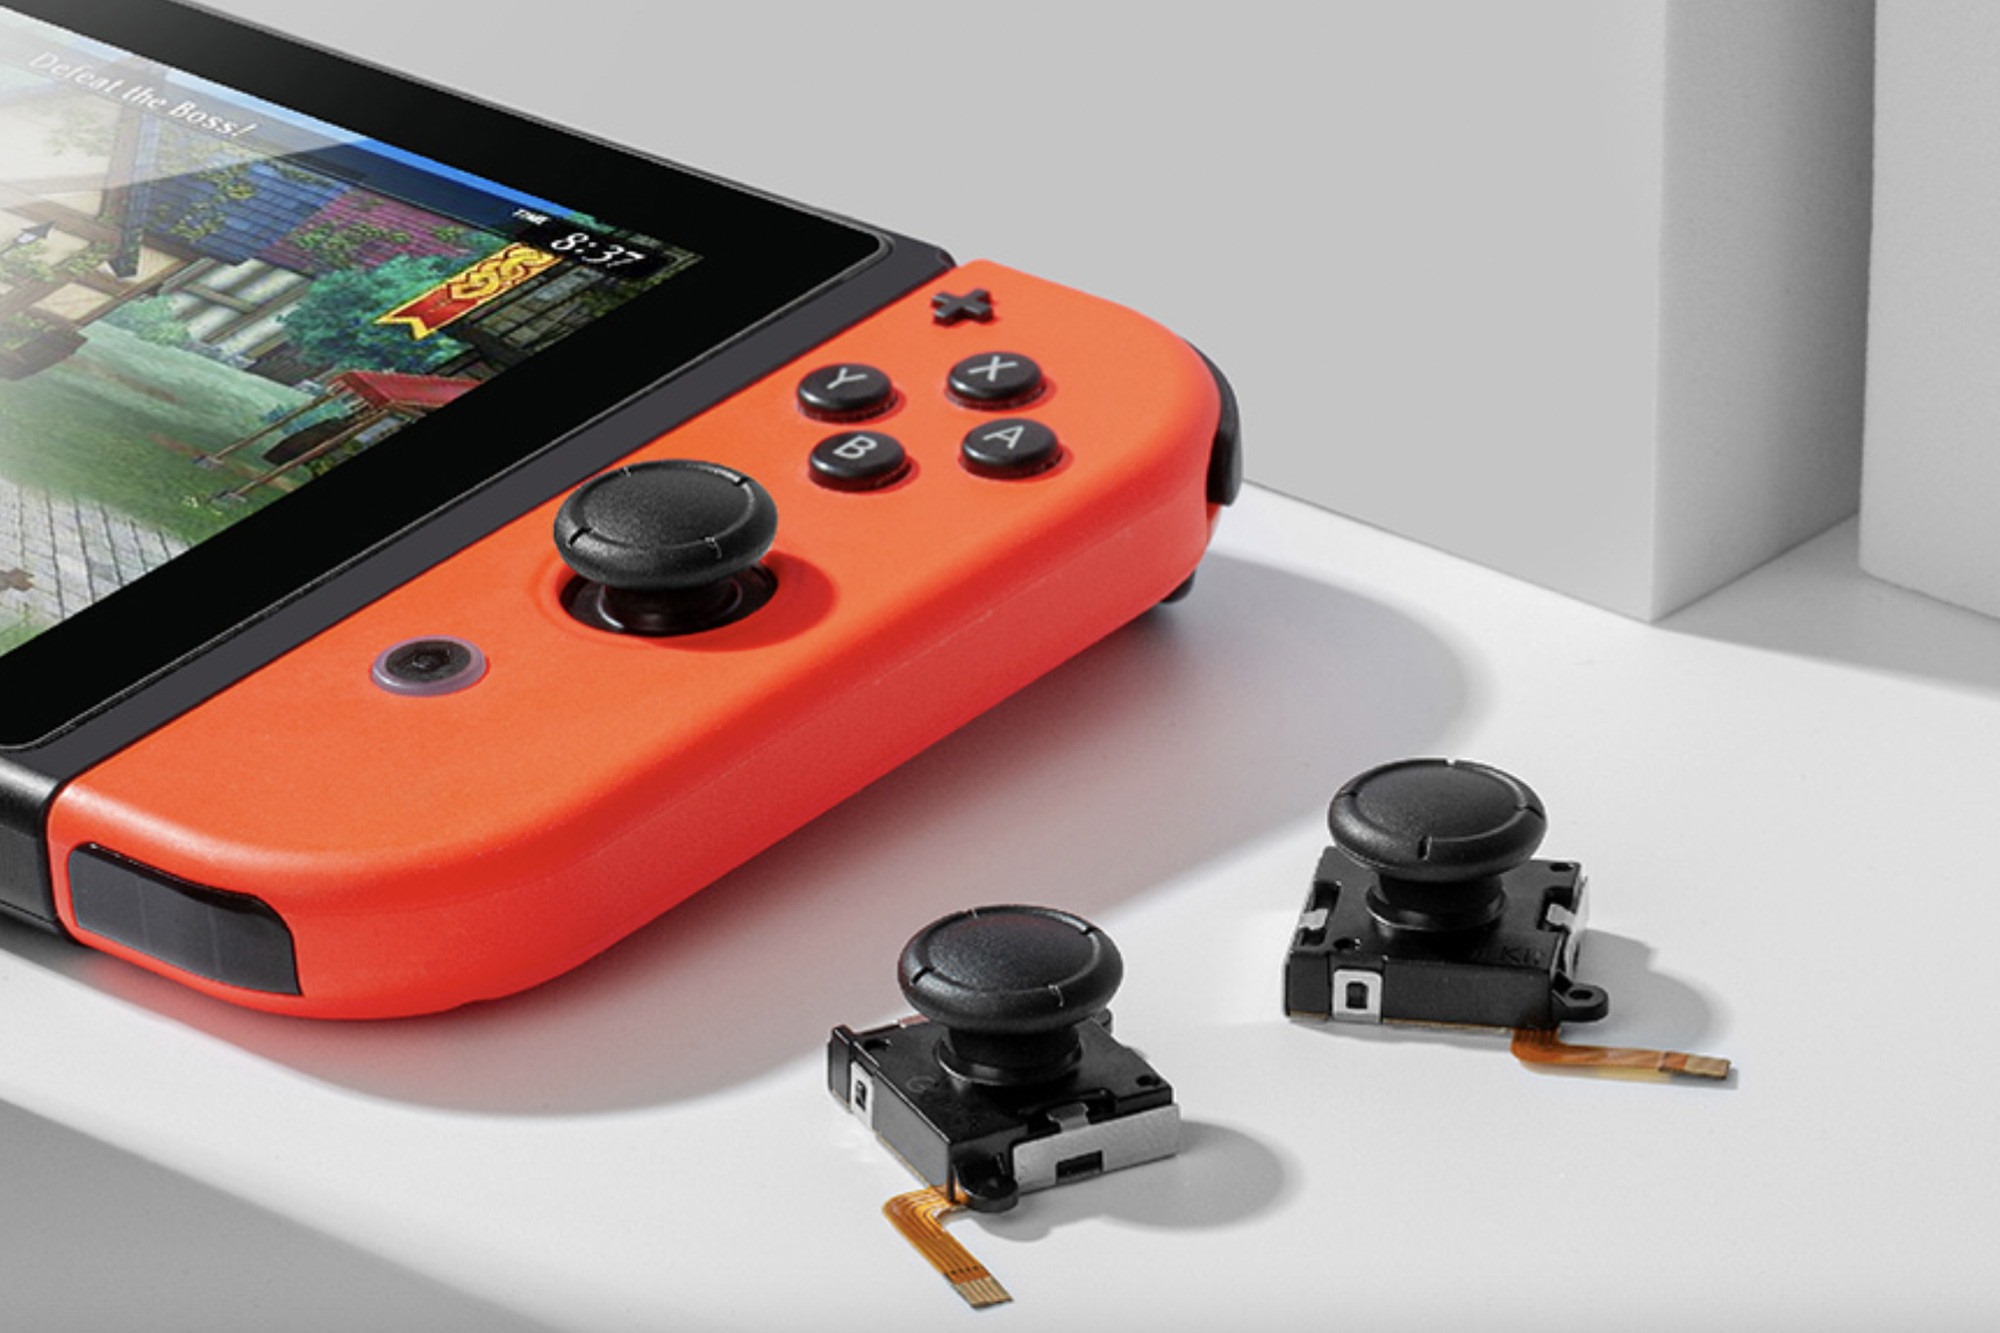 DIY Nintendo Switch Joystick Replacement: Step-by-Step Guide